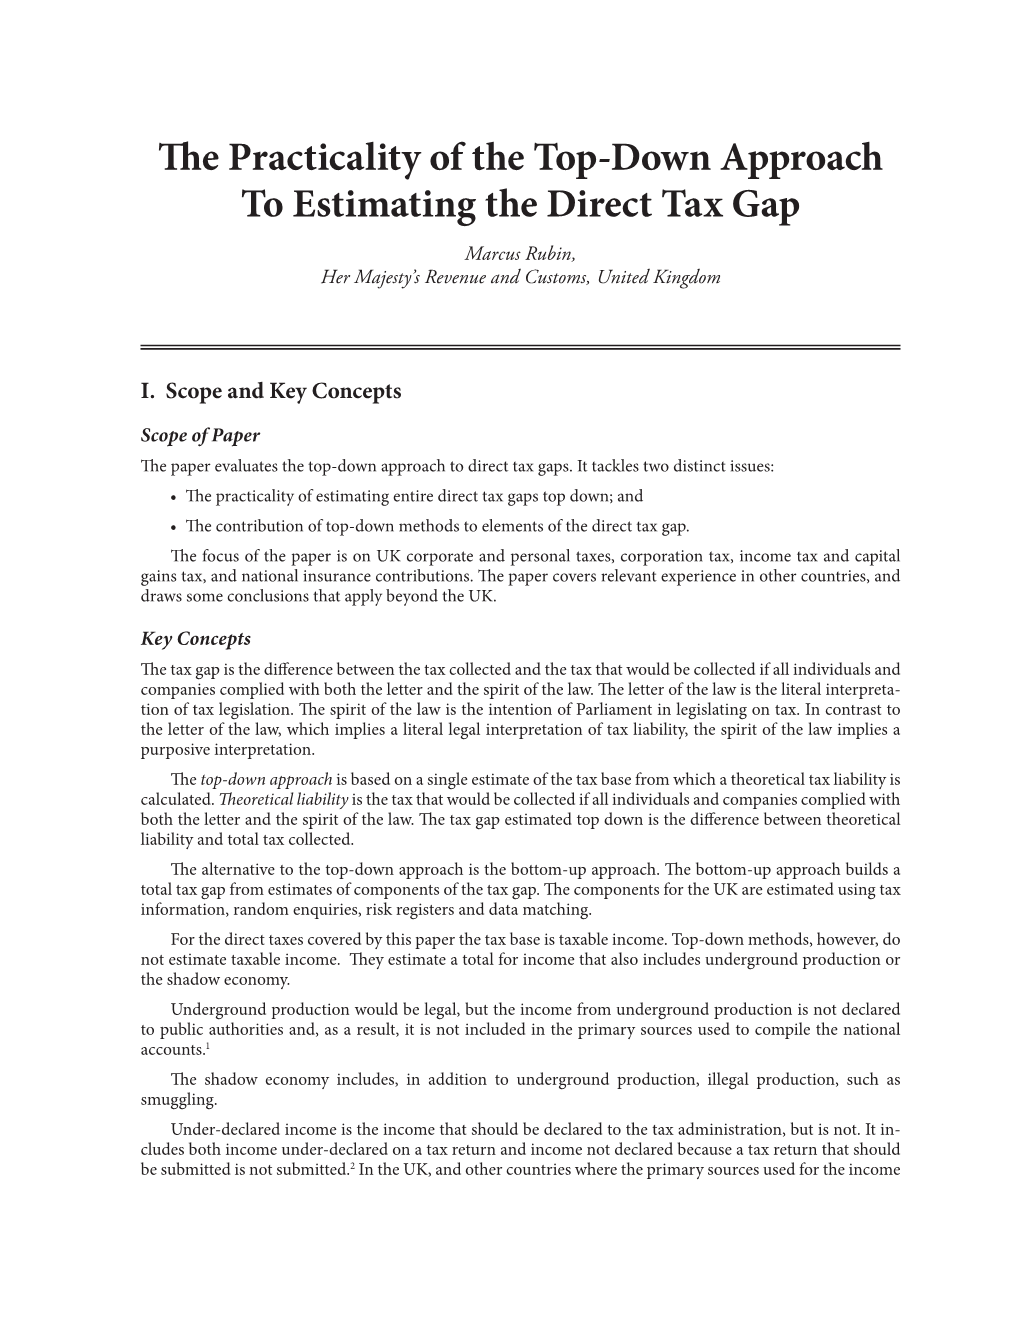 The Practicality of the Top-Down Approach to Estimating the Direct Tax Gap Marcus Rubin, Her Majesty’S Revenue and Customs, United Kingdom